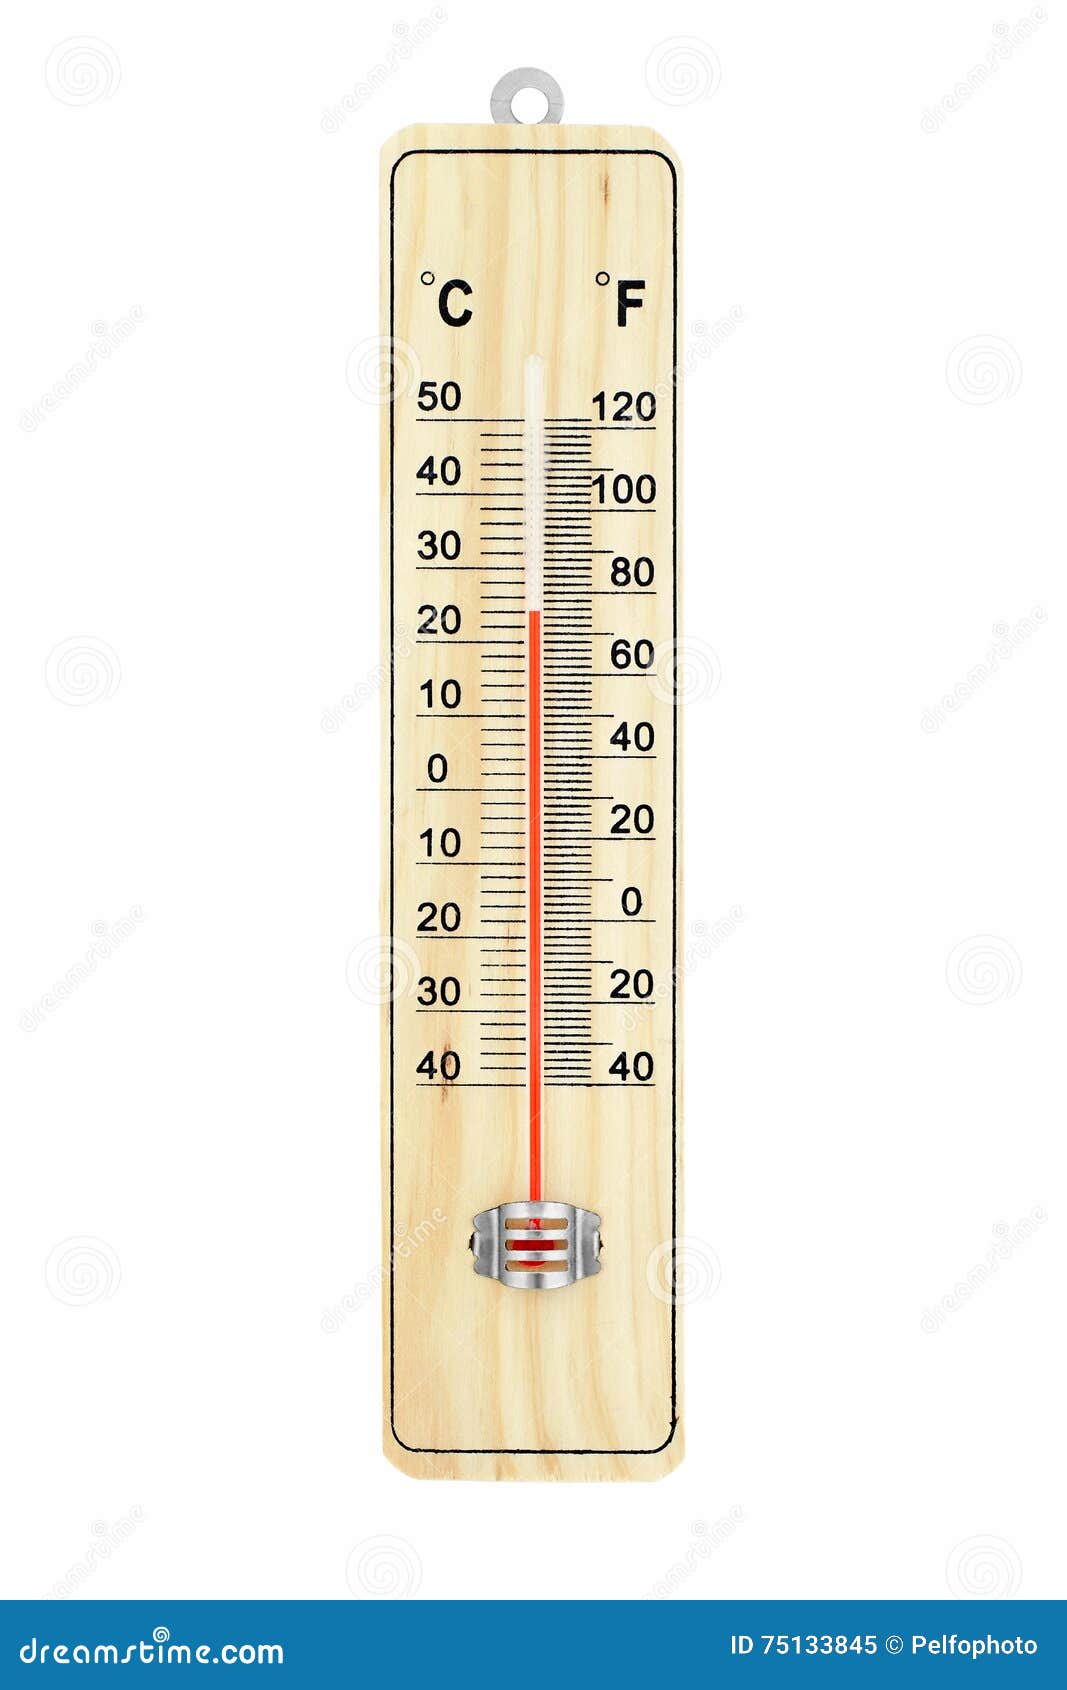 https://thumbs.dreamstime.com/z/thermometer-measuring-air-temperature-wooden-to-measure-isolated-white-background-75133845.jpg